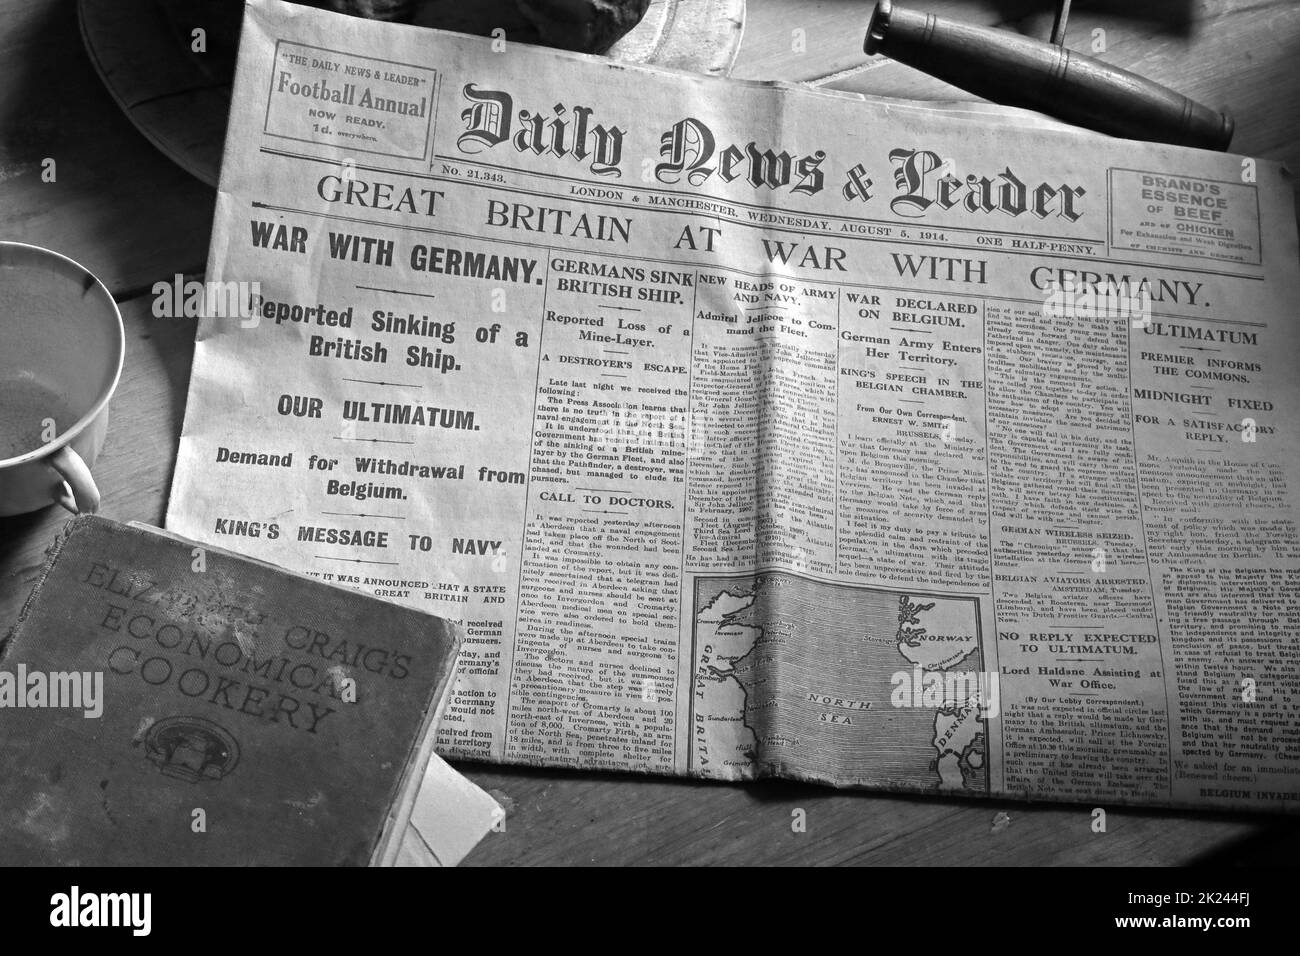 Daily News & Reader, Great Britain at war with Germany, old newspaper headline, Reported sinking of British ship, 05/08/1914 Stock Photo